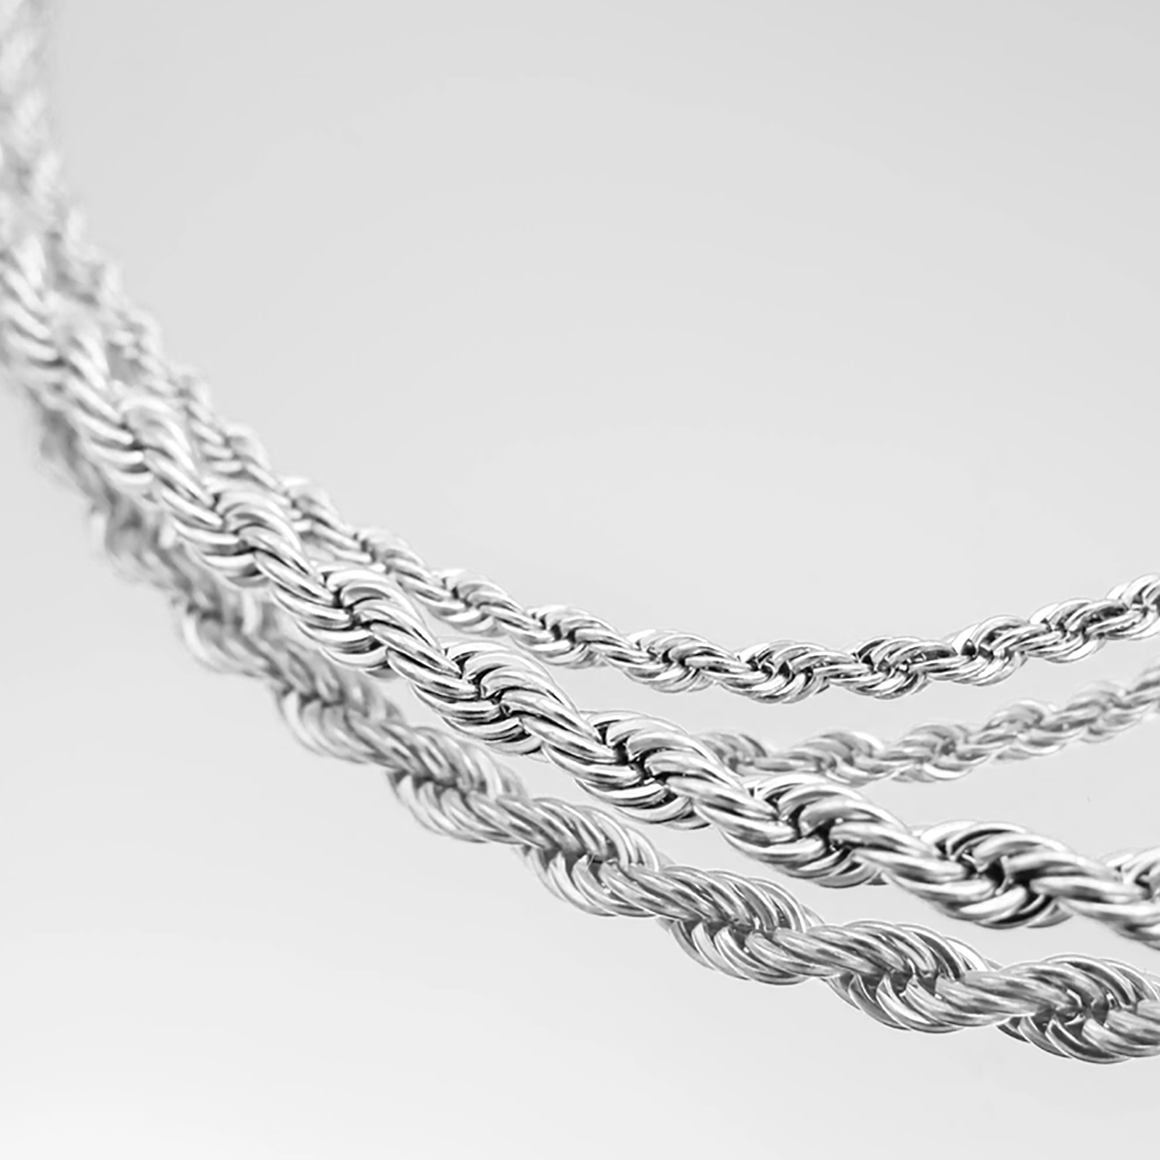 54 FLORAL 3mm SNAKE ROPE NECKLACE CHAIN - SILVER